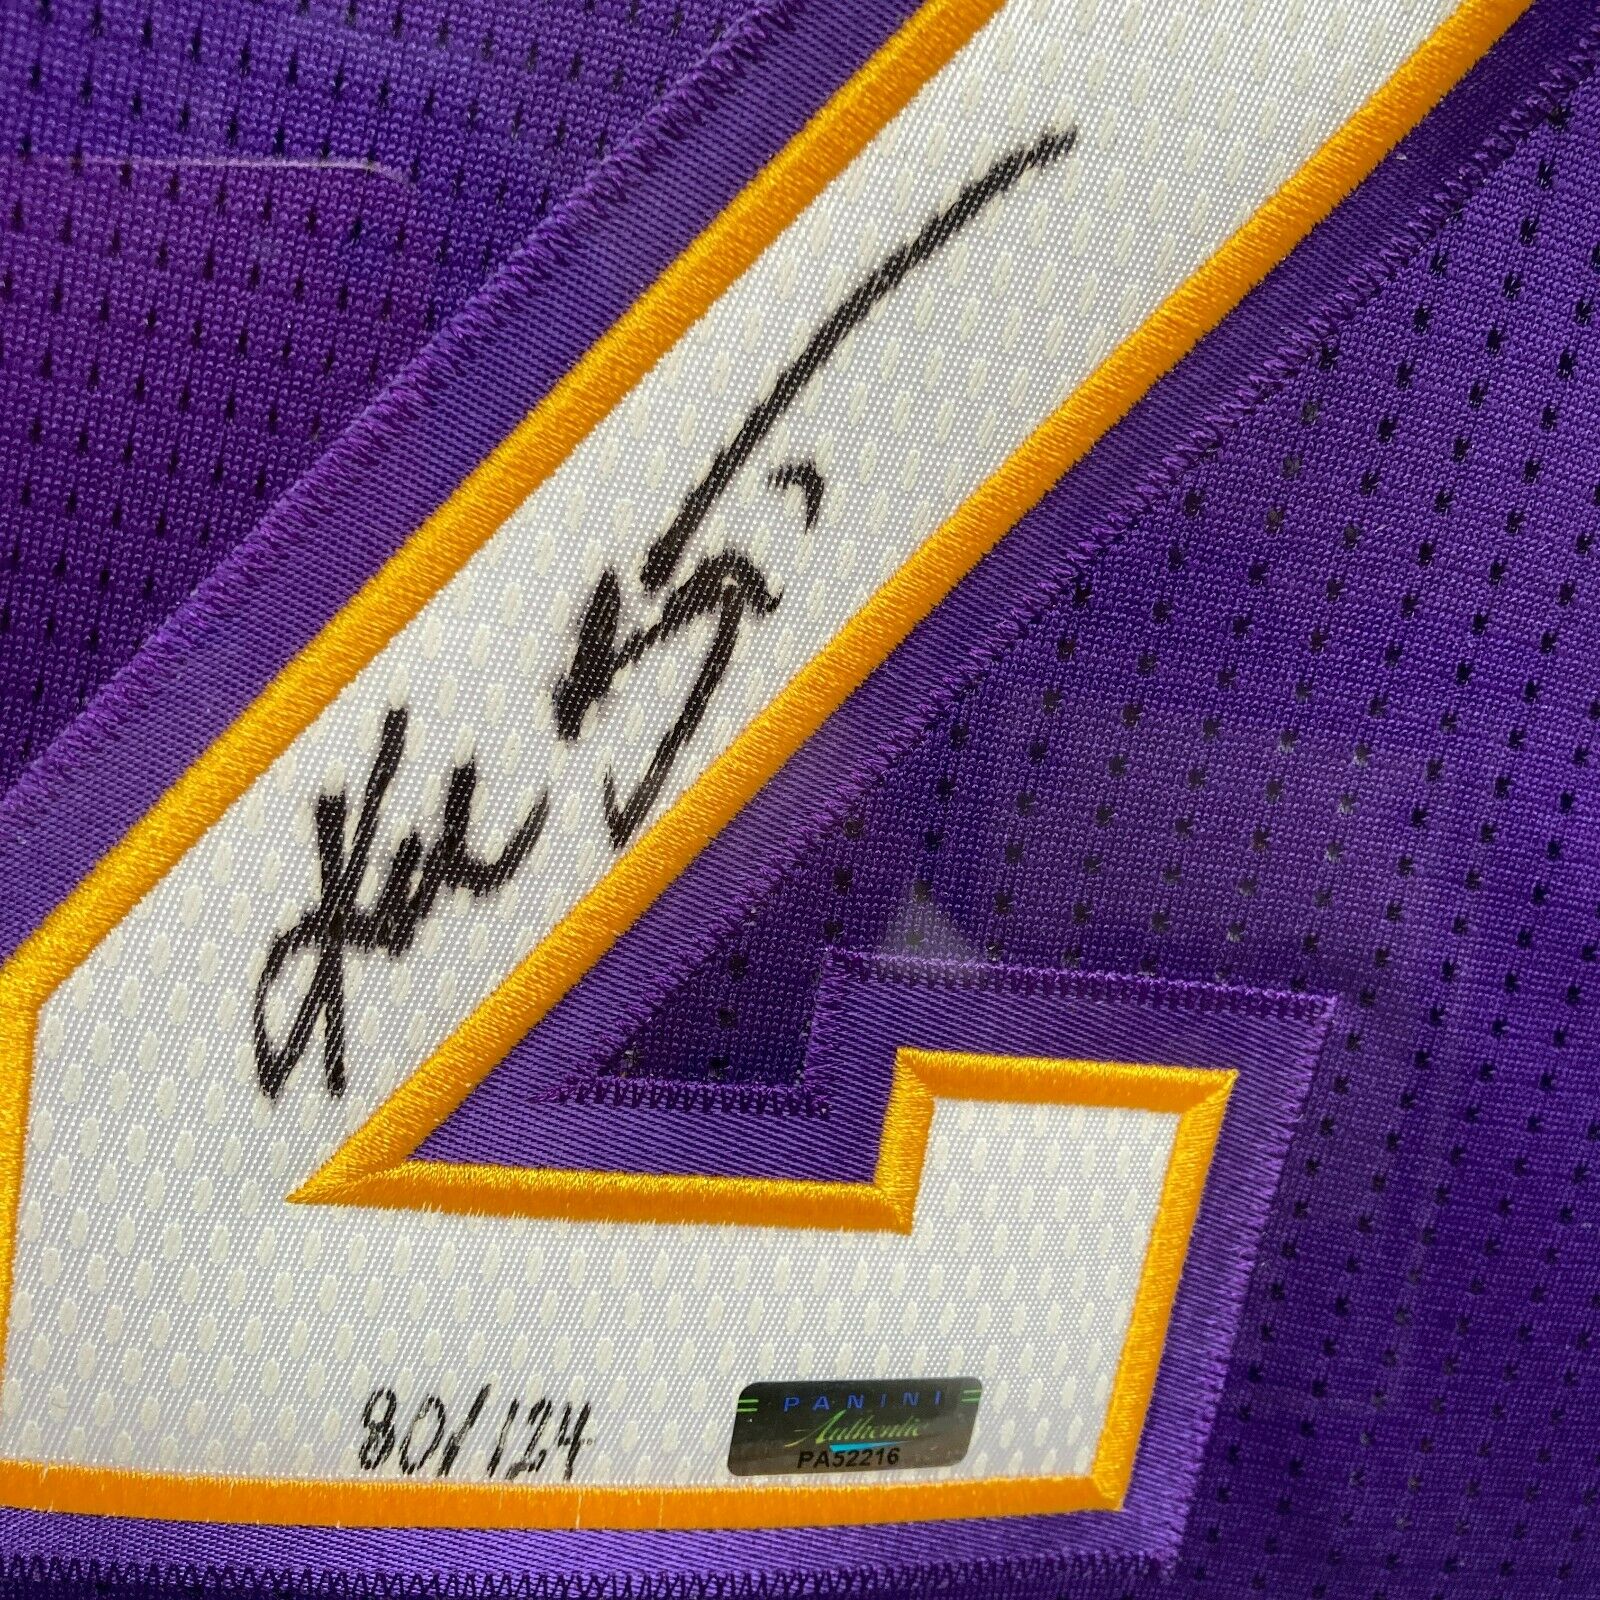 Kobe Bryant Mamba Out Signed #24 Authentic Los Angeles Lakers Jersey  Panini